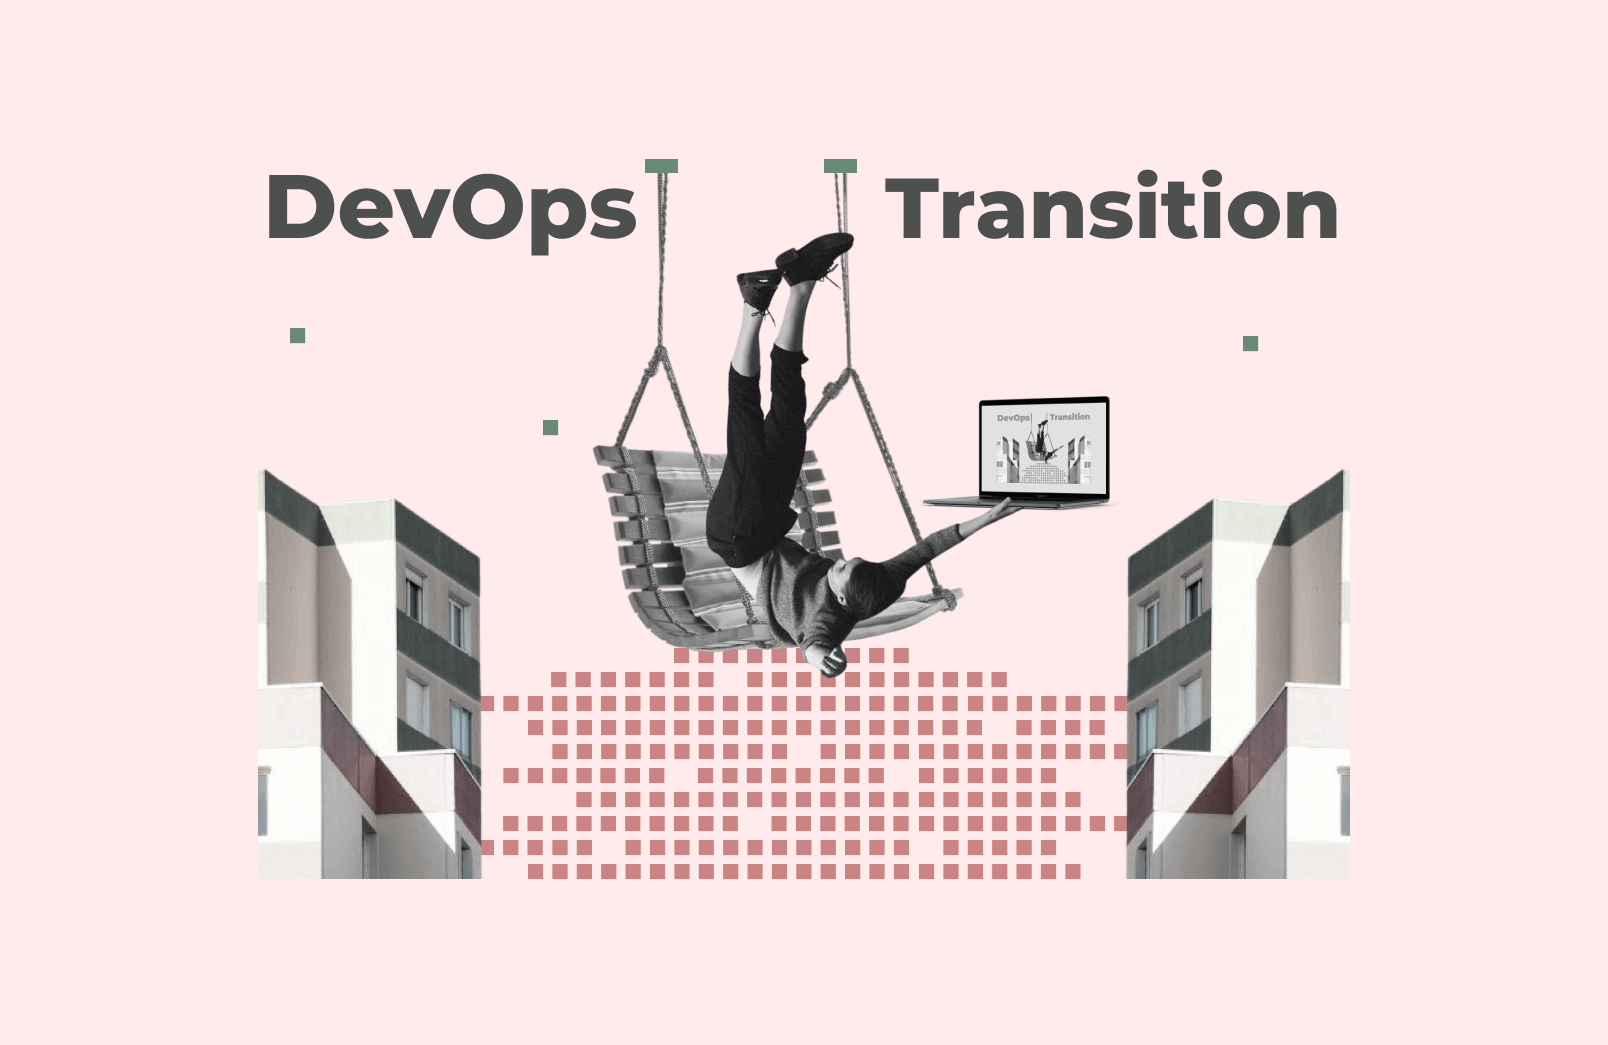 what is important for successful DevOps transition